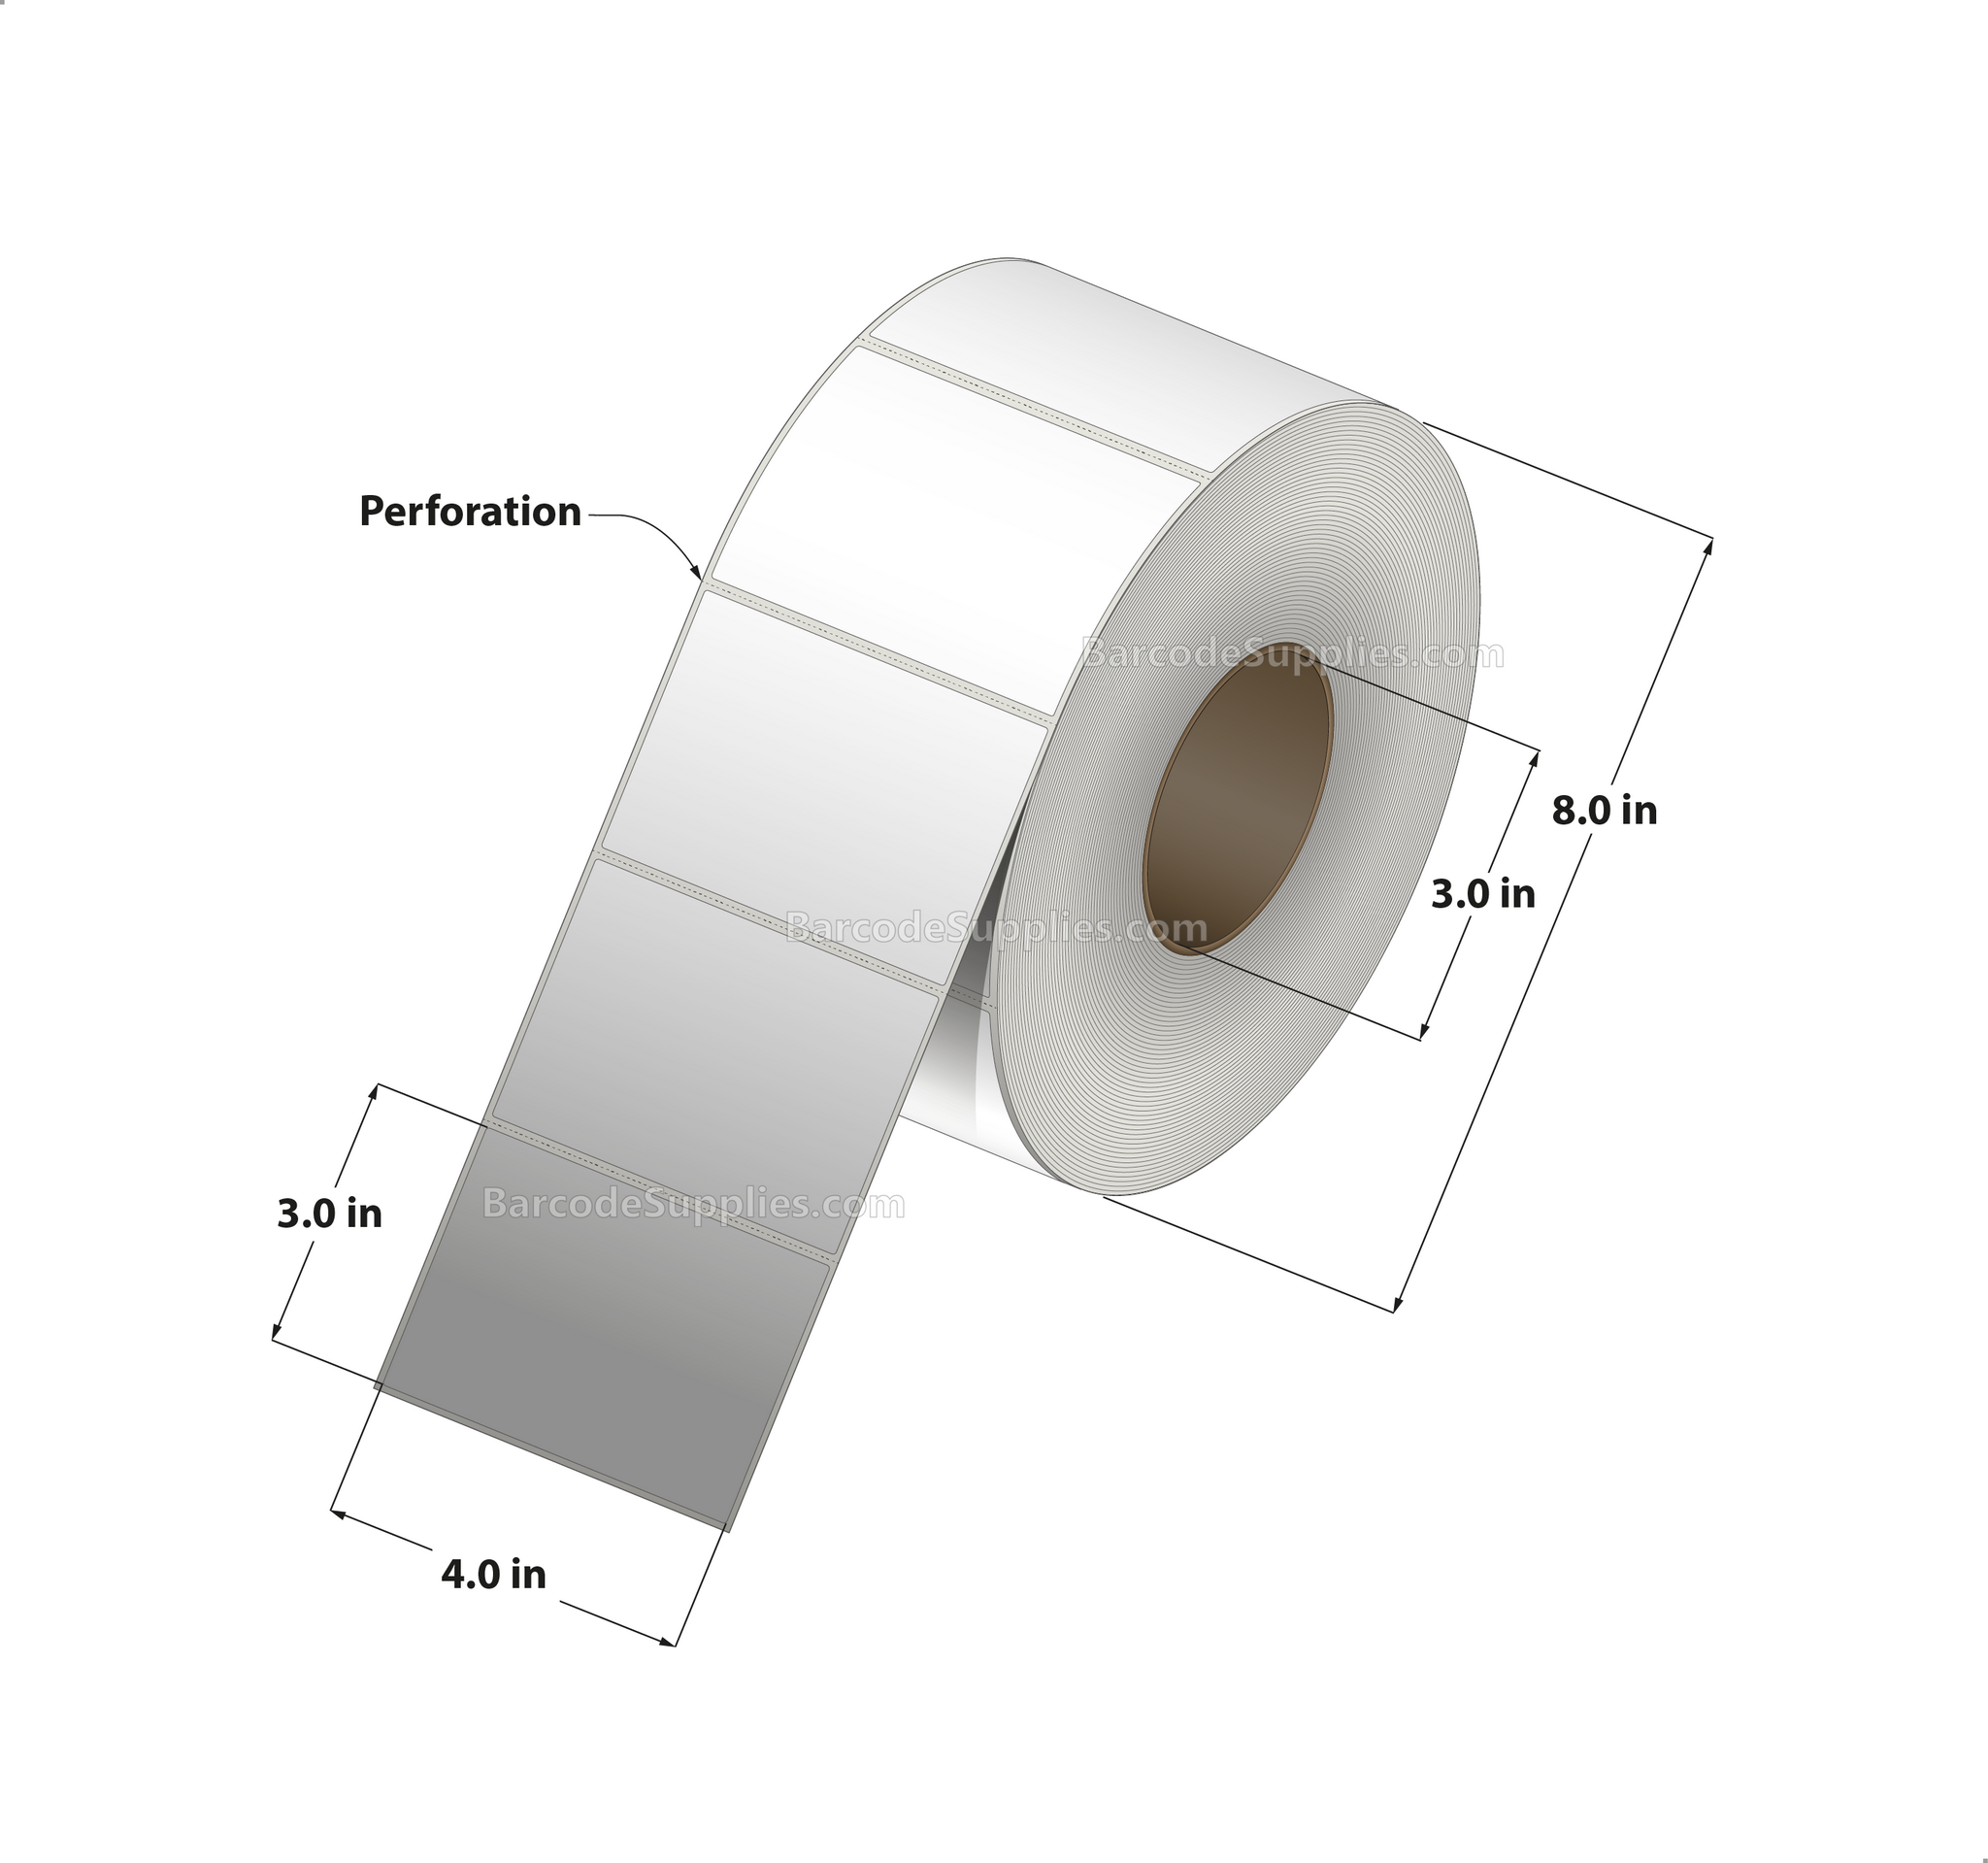 4 x 3 Direct Thermal White Labels With Acrylic Adhesive - Perforated - 1900 Labels Per Roll - Carton Of 4 Rolls - 7600 Labels Total - MPN: RD-4-3-1900-3 - BarcodeSource, Inc.